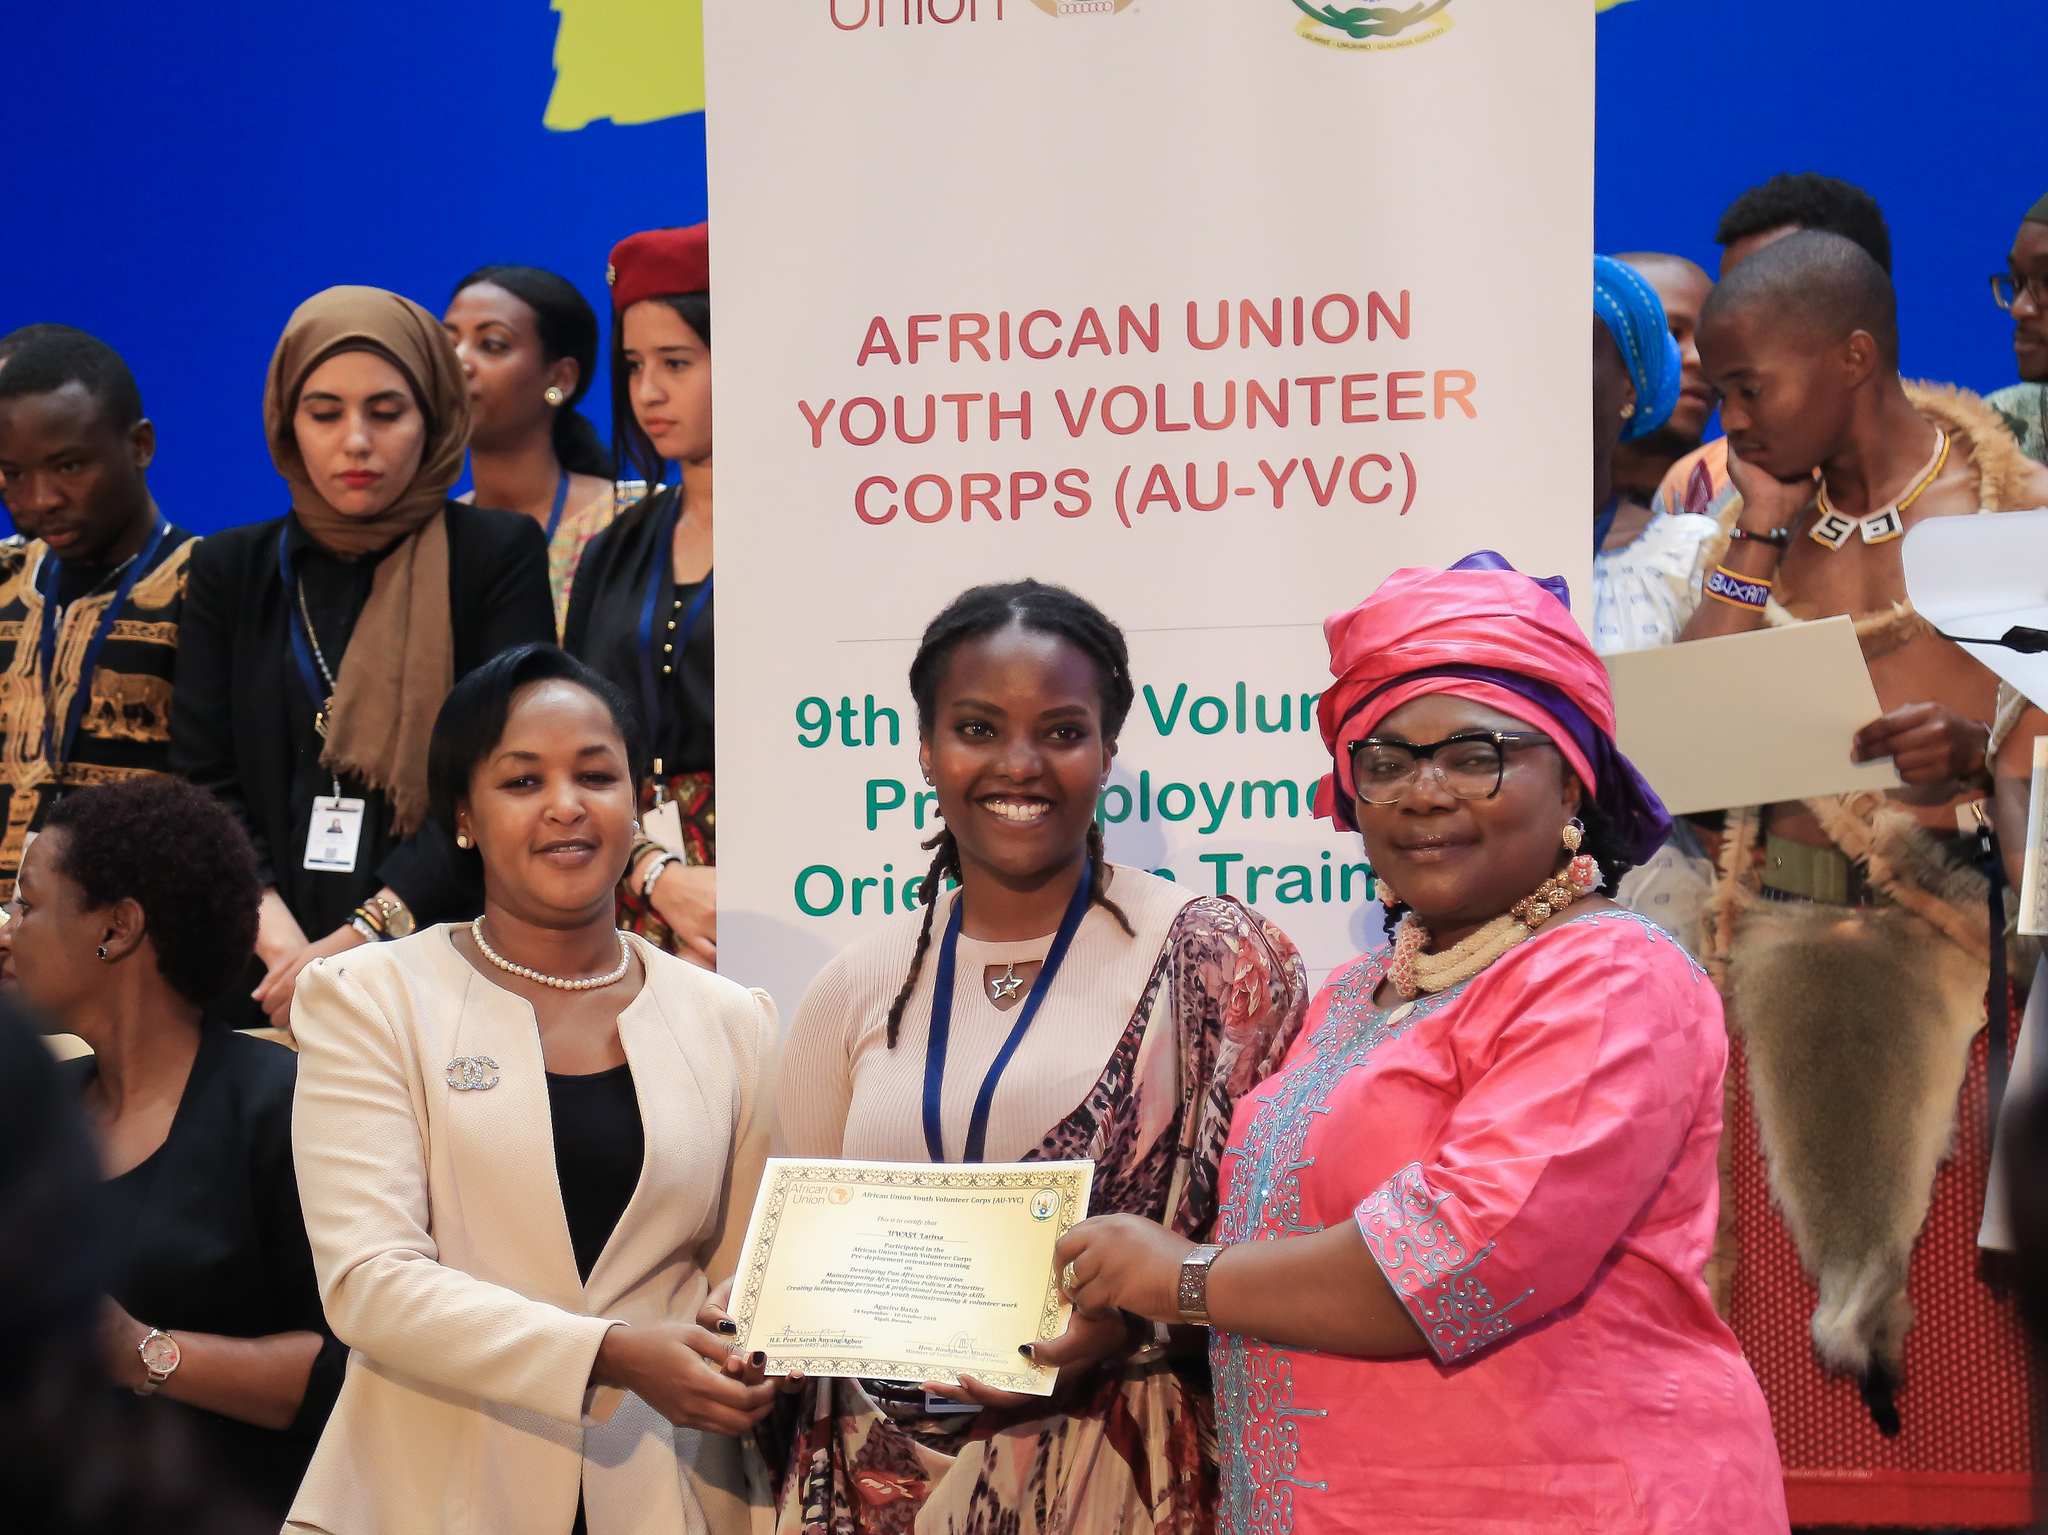 One of the graduate volunteers pause for a photo with Minister for Youth Rosemary Mbabazi (L) and Sarah Agboh, the AU Commissioner Human Resources, Science and Technology. / Nadege Imbabazi